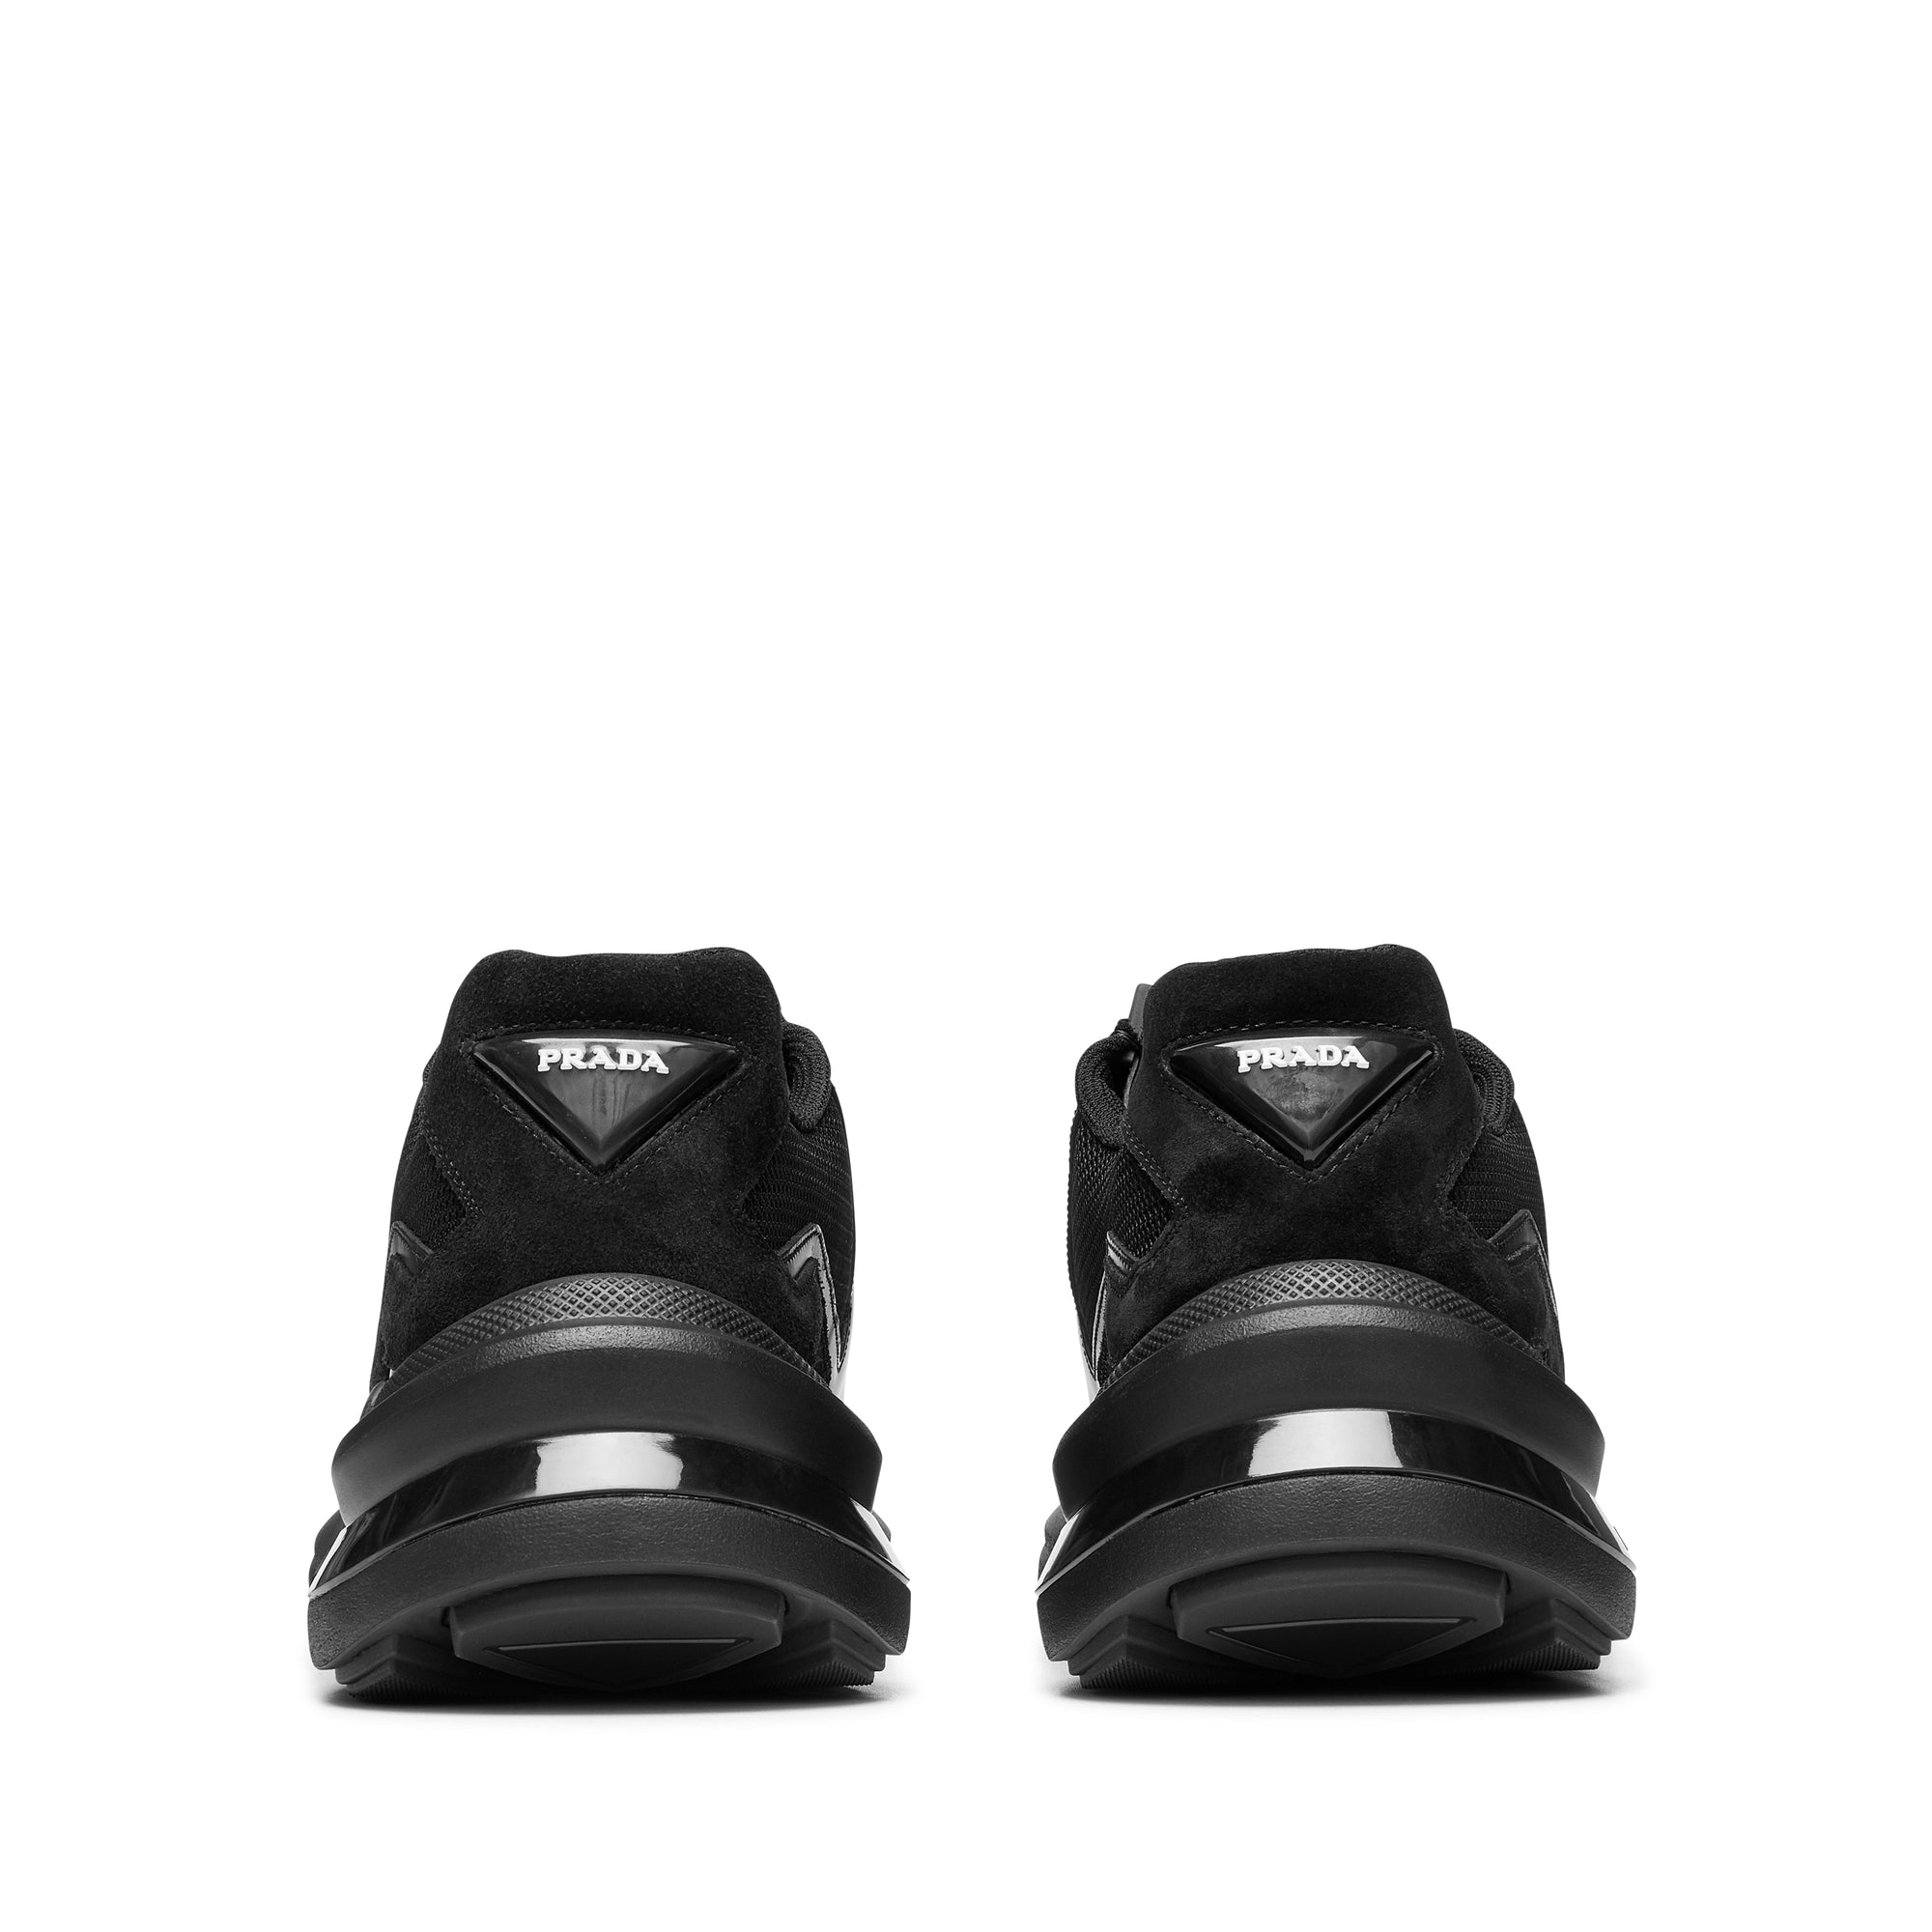 Prada - Men's Systeme Brushed Leather Sneakers - (Nero) view 3